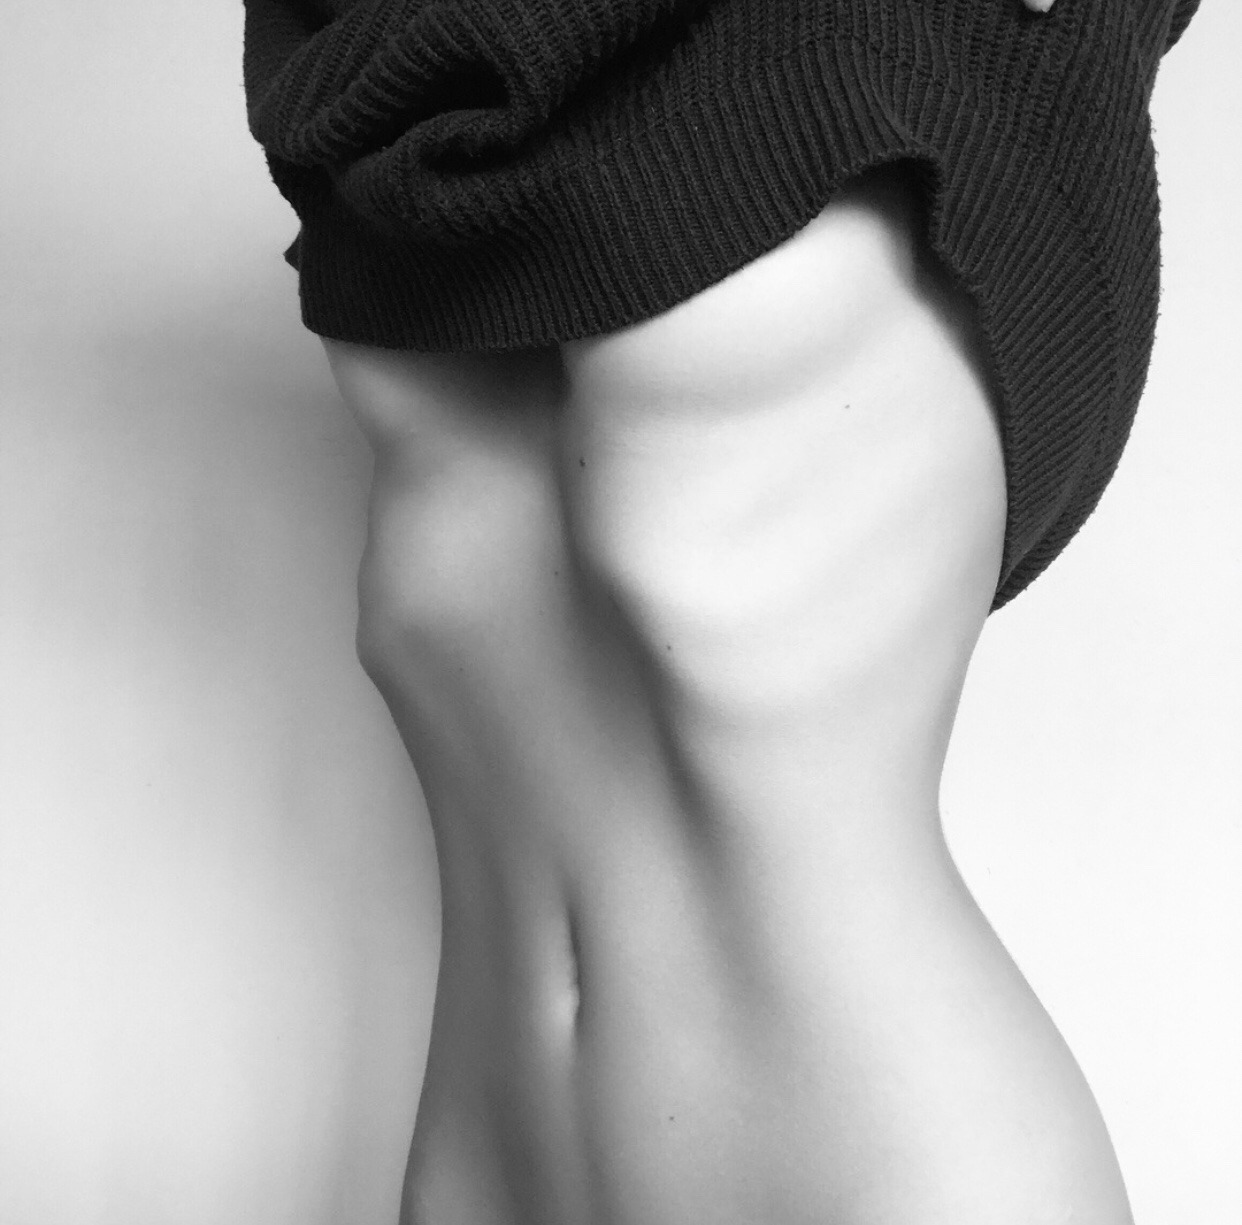 Sexy thin woman showing ribs